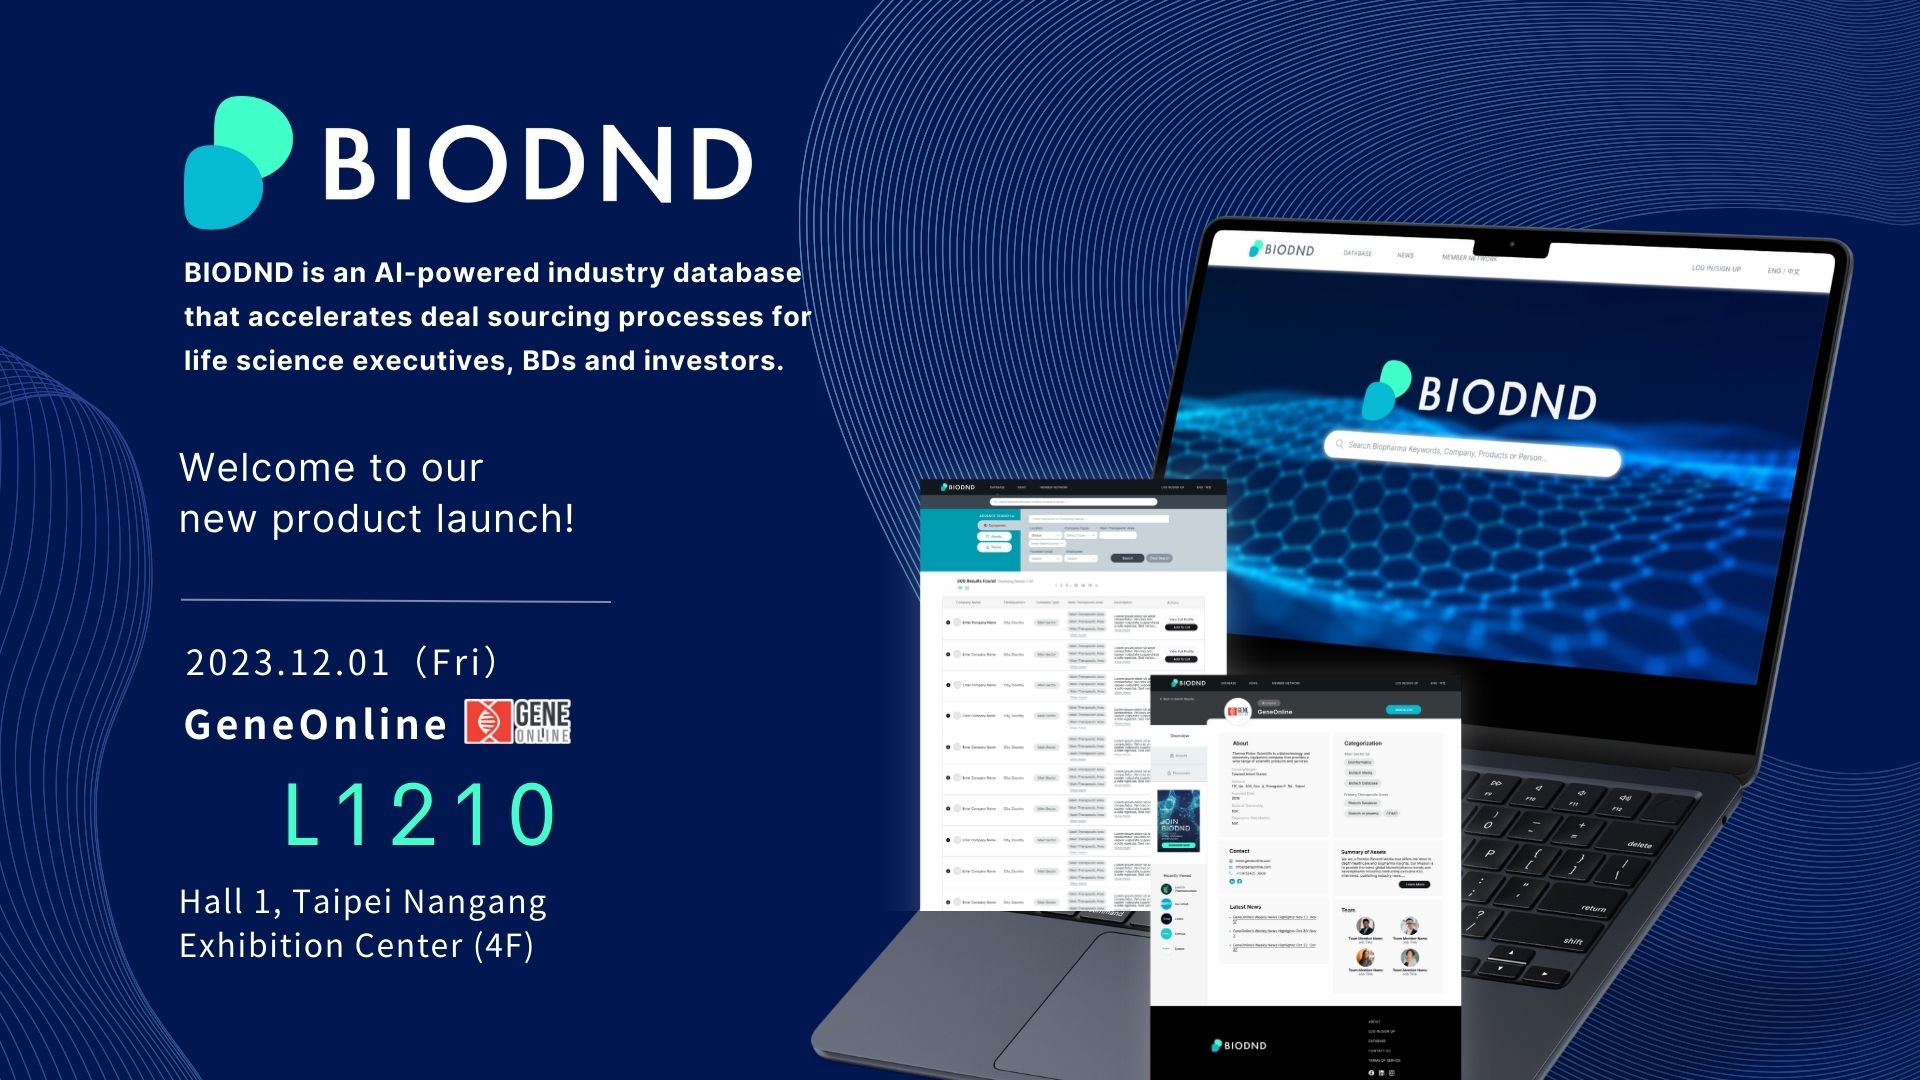 BIODND new product launch event.